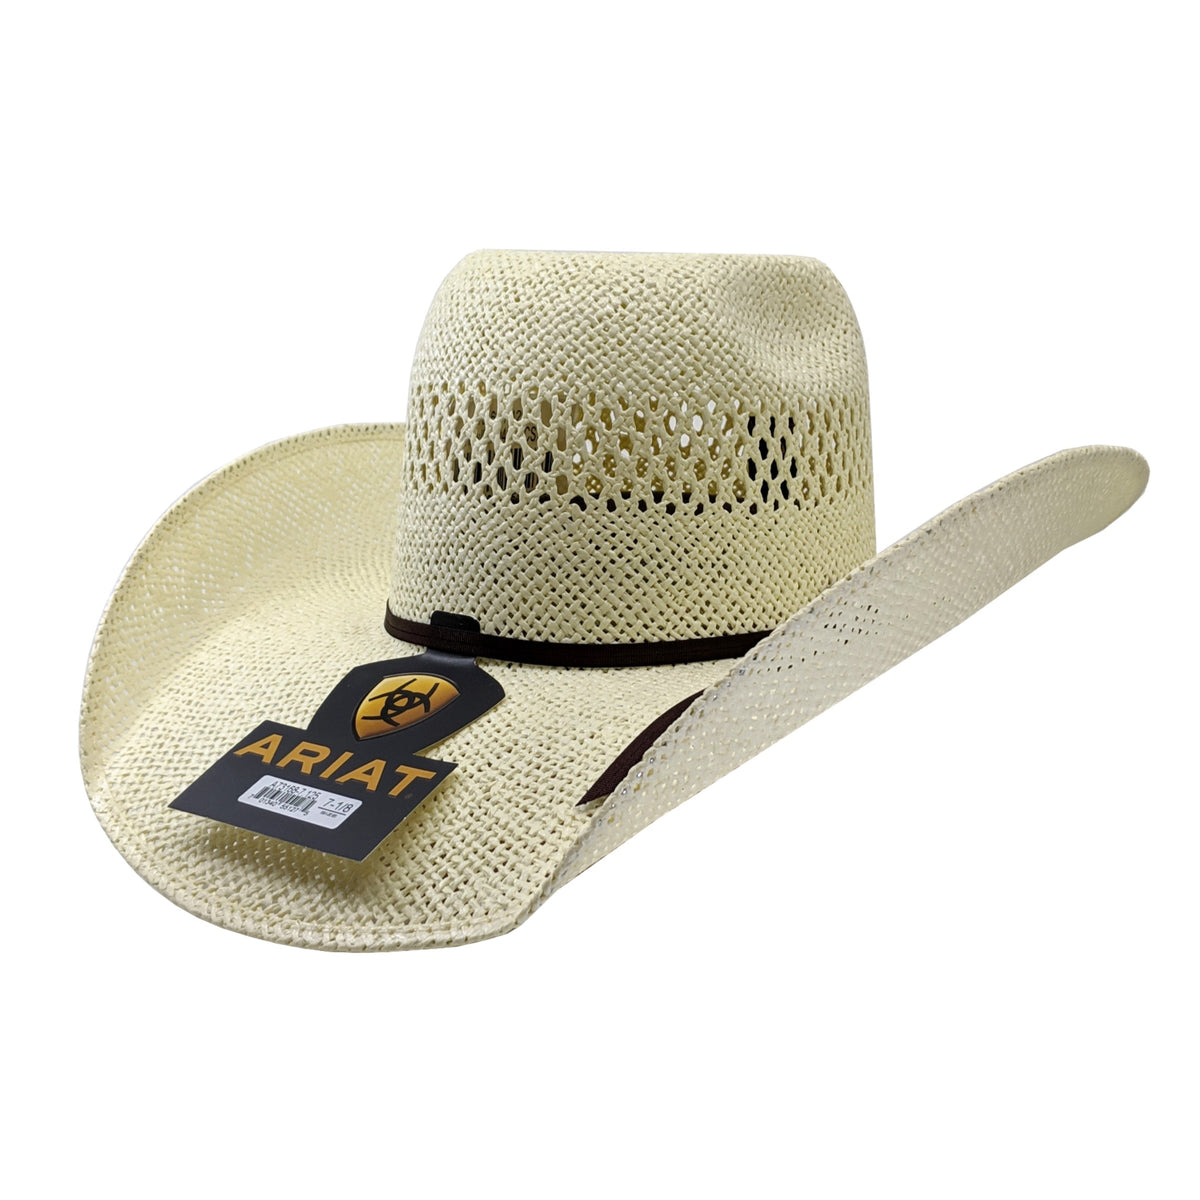 Ariat Twisted Weave Straw Cowboy Hat (4 1/2